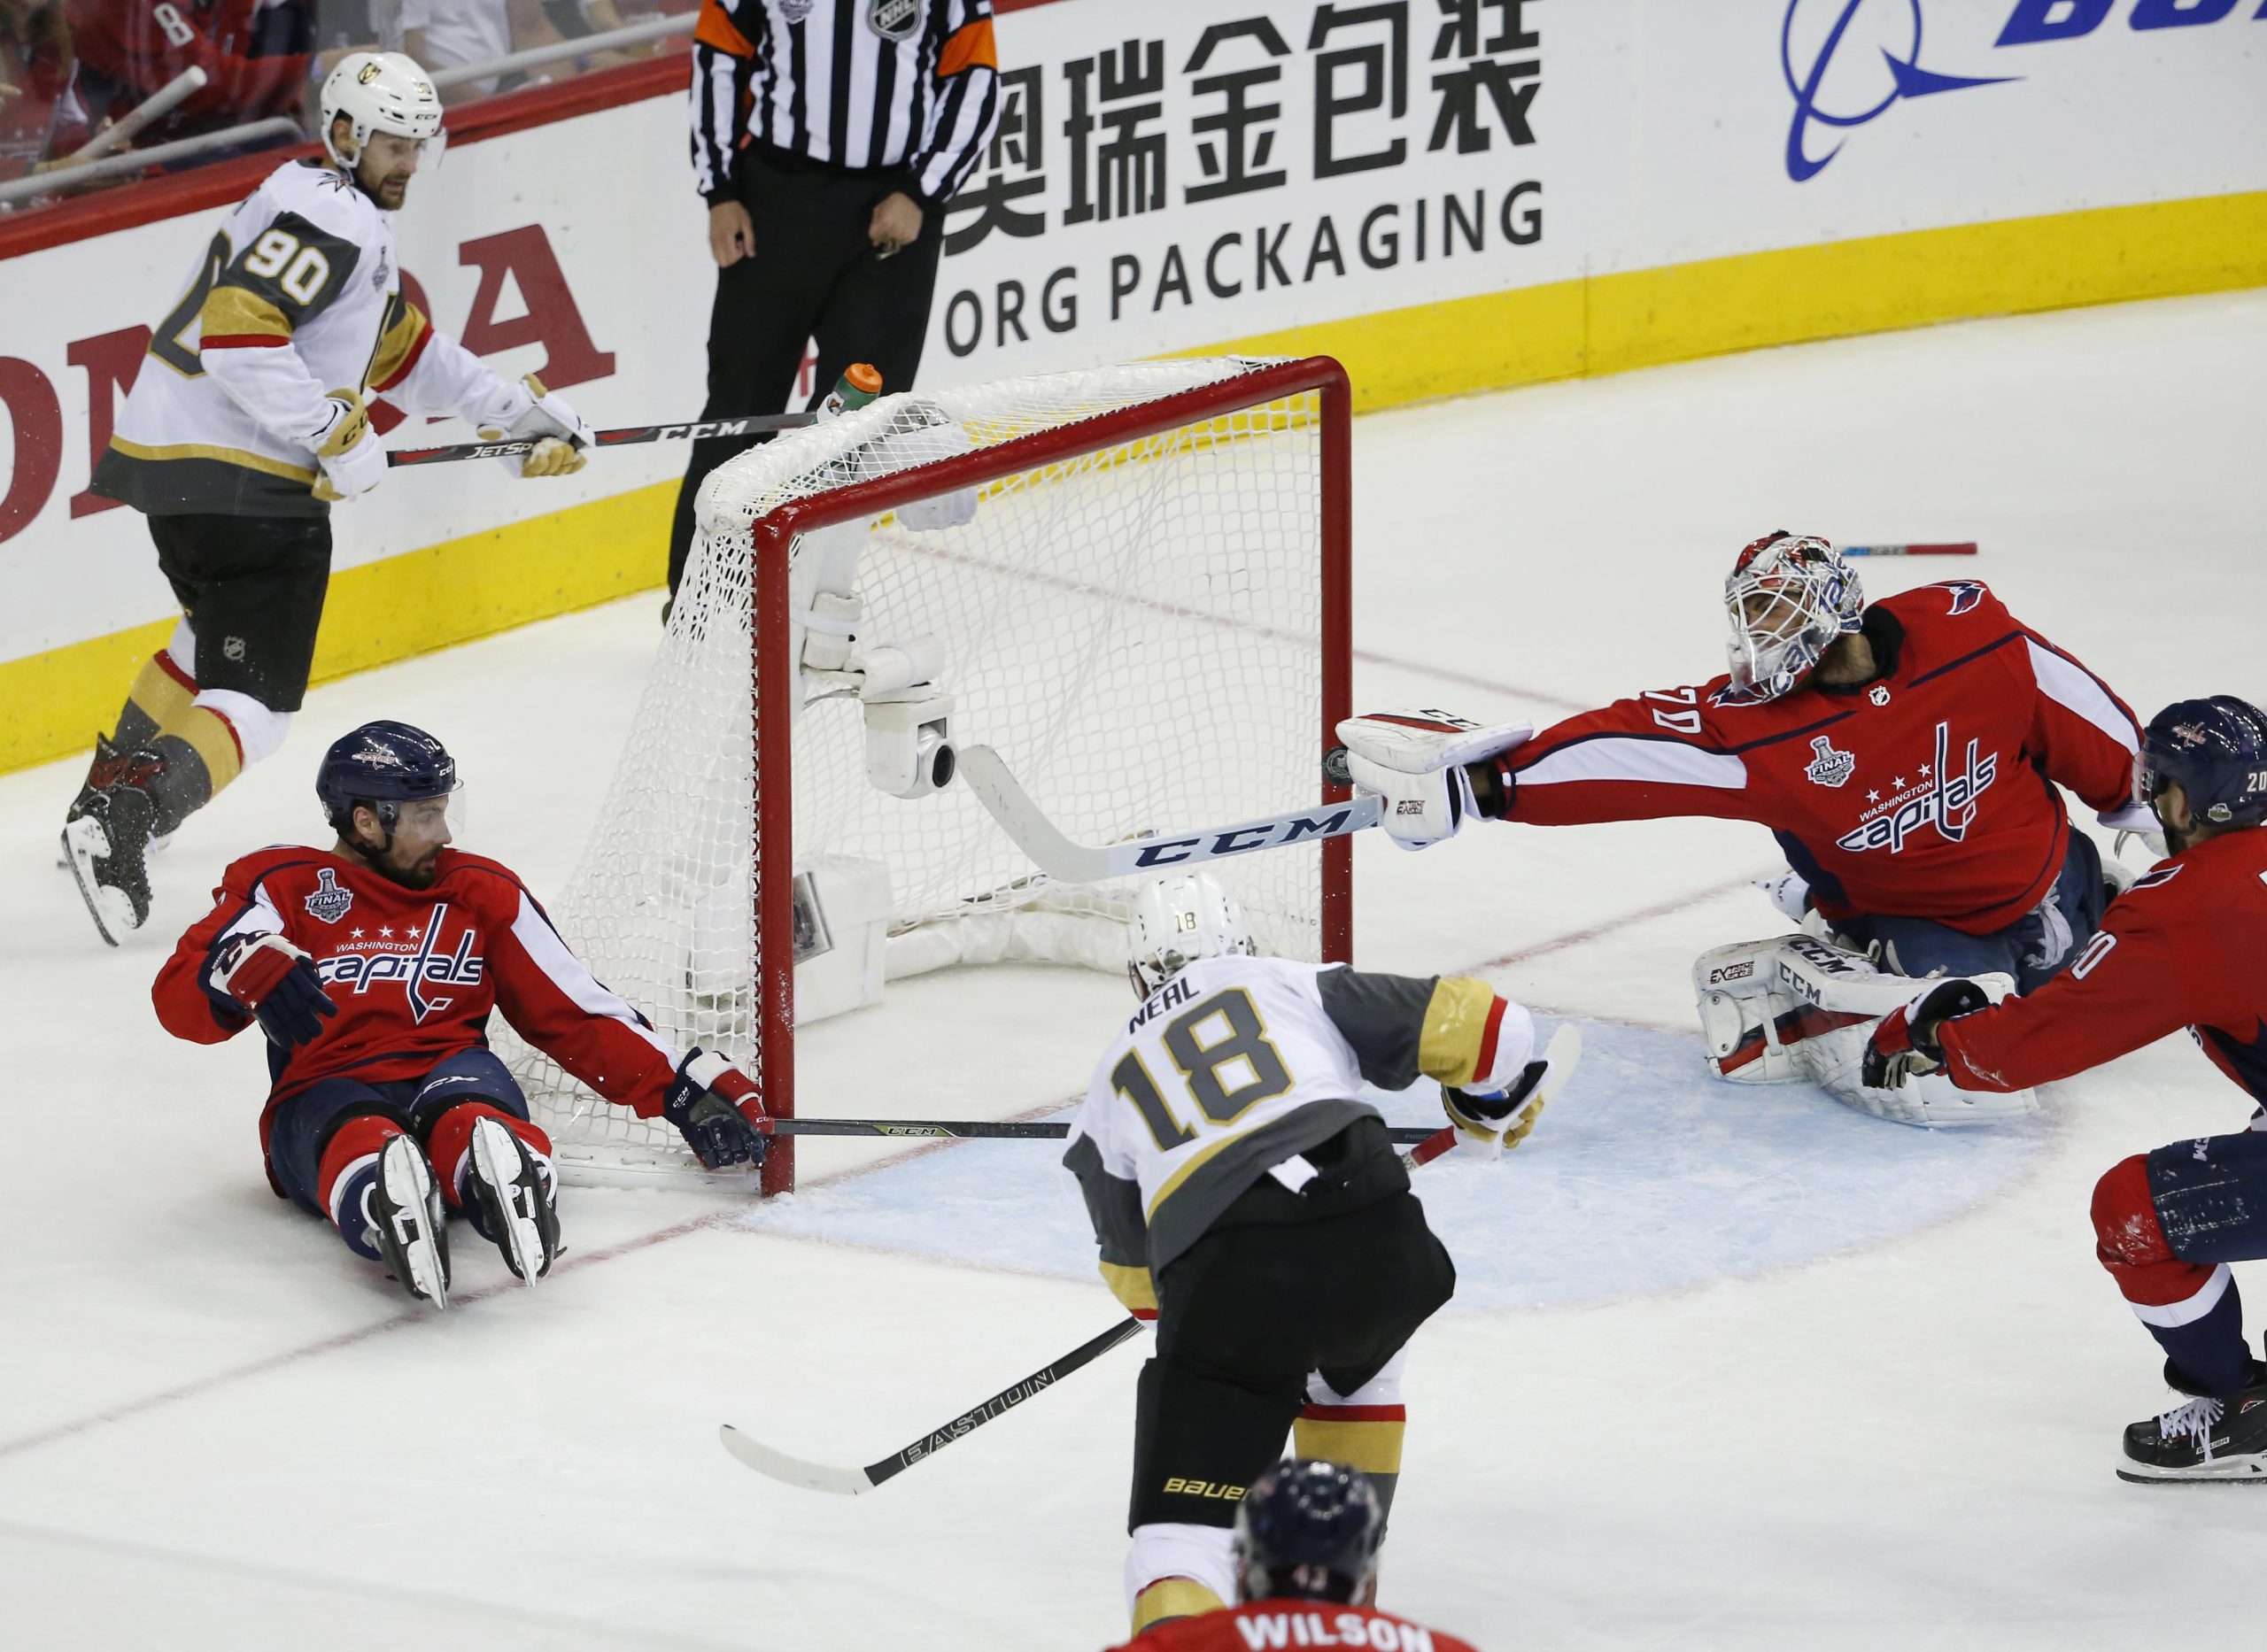 NHL: Stanley Cup Final-Vegas Golden Knights at Washington Capitals